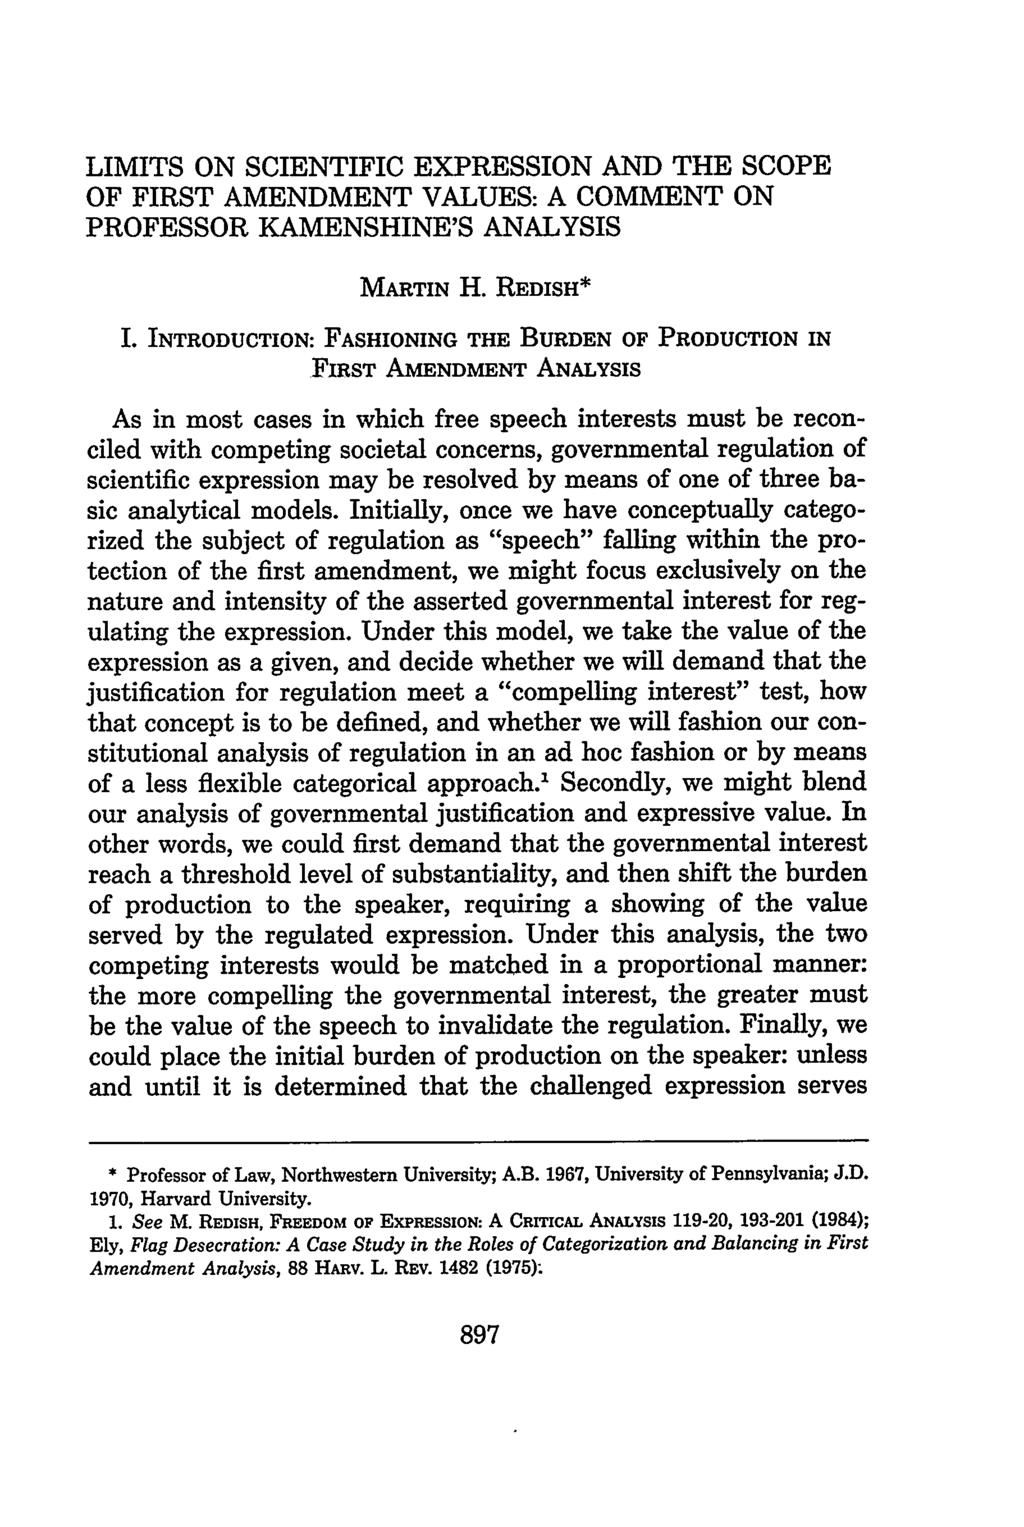 LIMITS ON SCIENTIFIC EXPRESSION AND THE SCOPE OF FIRST AMENDMENT VALUES: A COMMENT ON PROFESSOR KAMENSHINE'S ANALYSIS MARTIN H. REDISH* I.